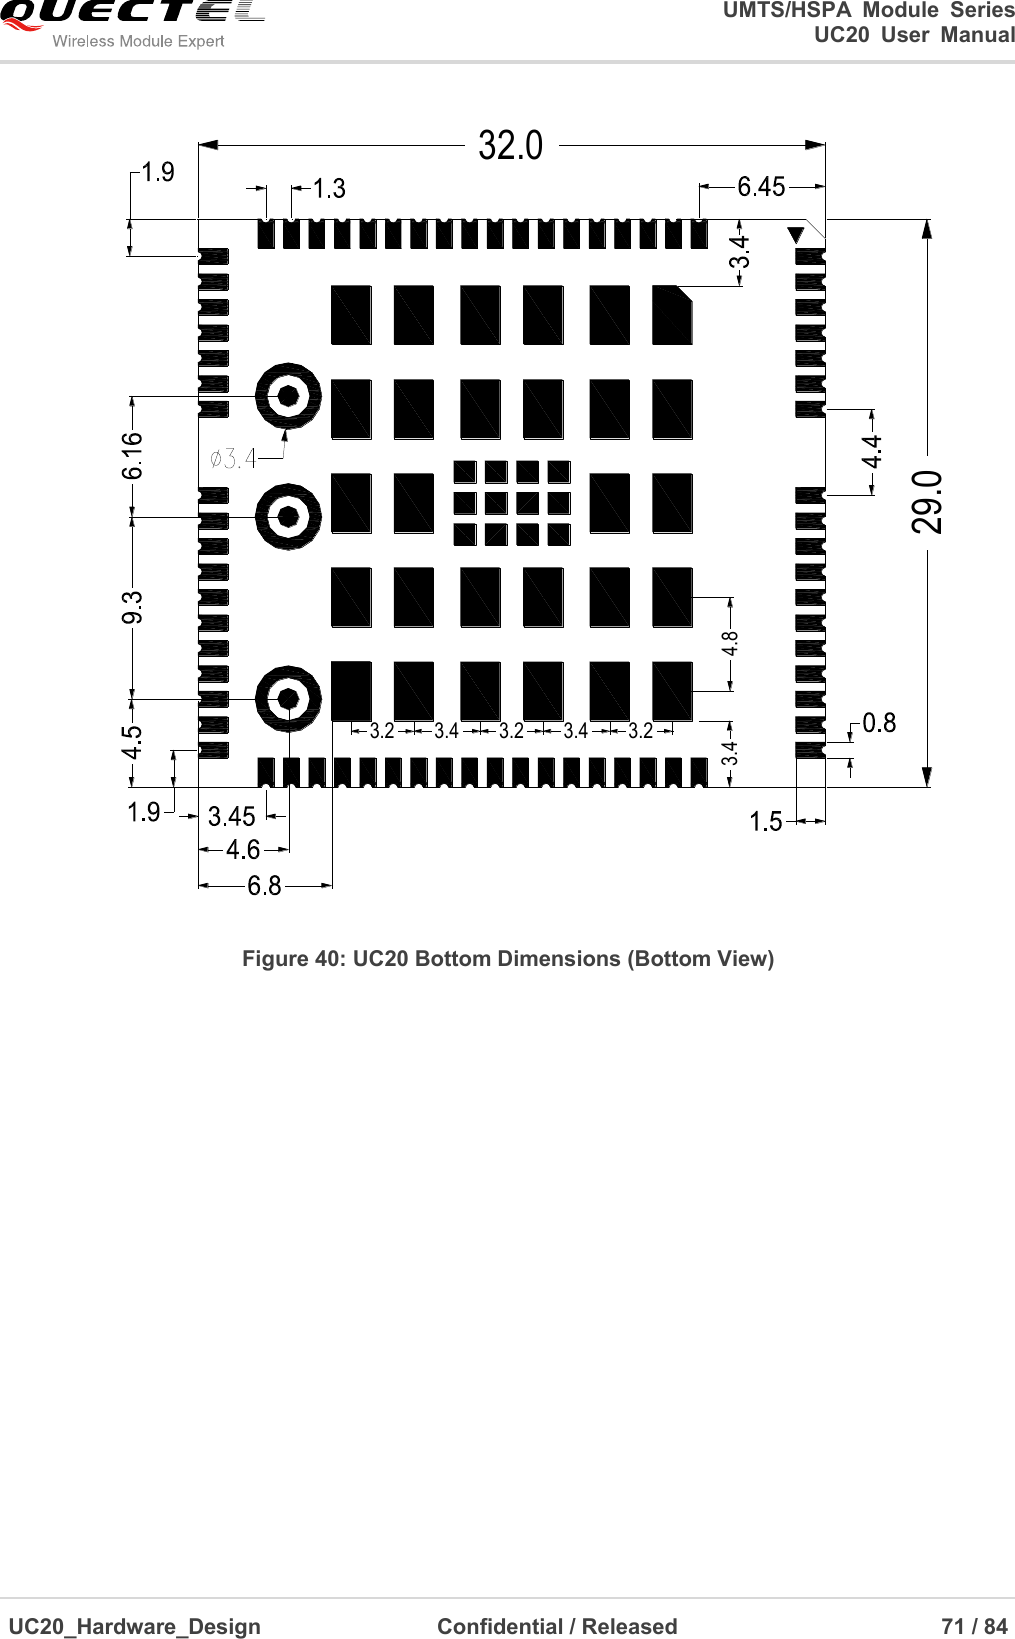                                                                                                                                               UMTS/HSPA  Module  Series                                                                 UC20  User  Manual  UC20_Hardware_Design                  Confidential / Released                            71 / 84     3.43.2 3.4 3.2 3.4 3.24.832.029.0 Figure 40: UC20 Bottom Dimensions (Bottom View)  